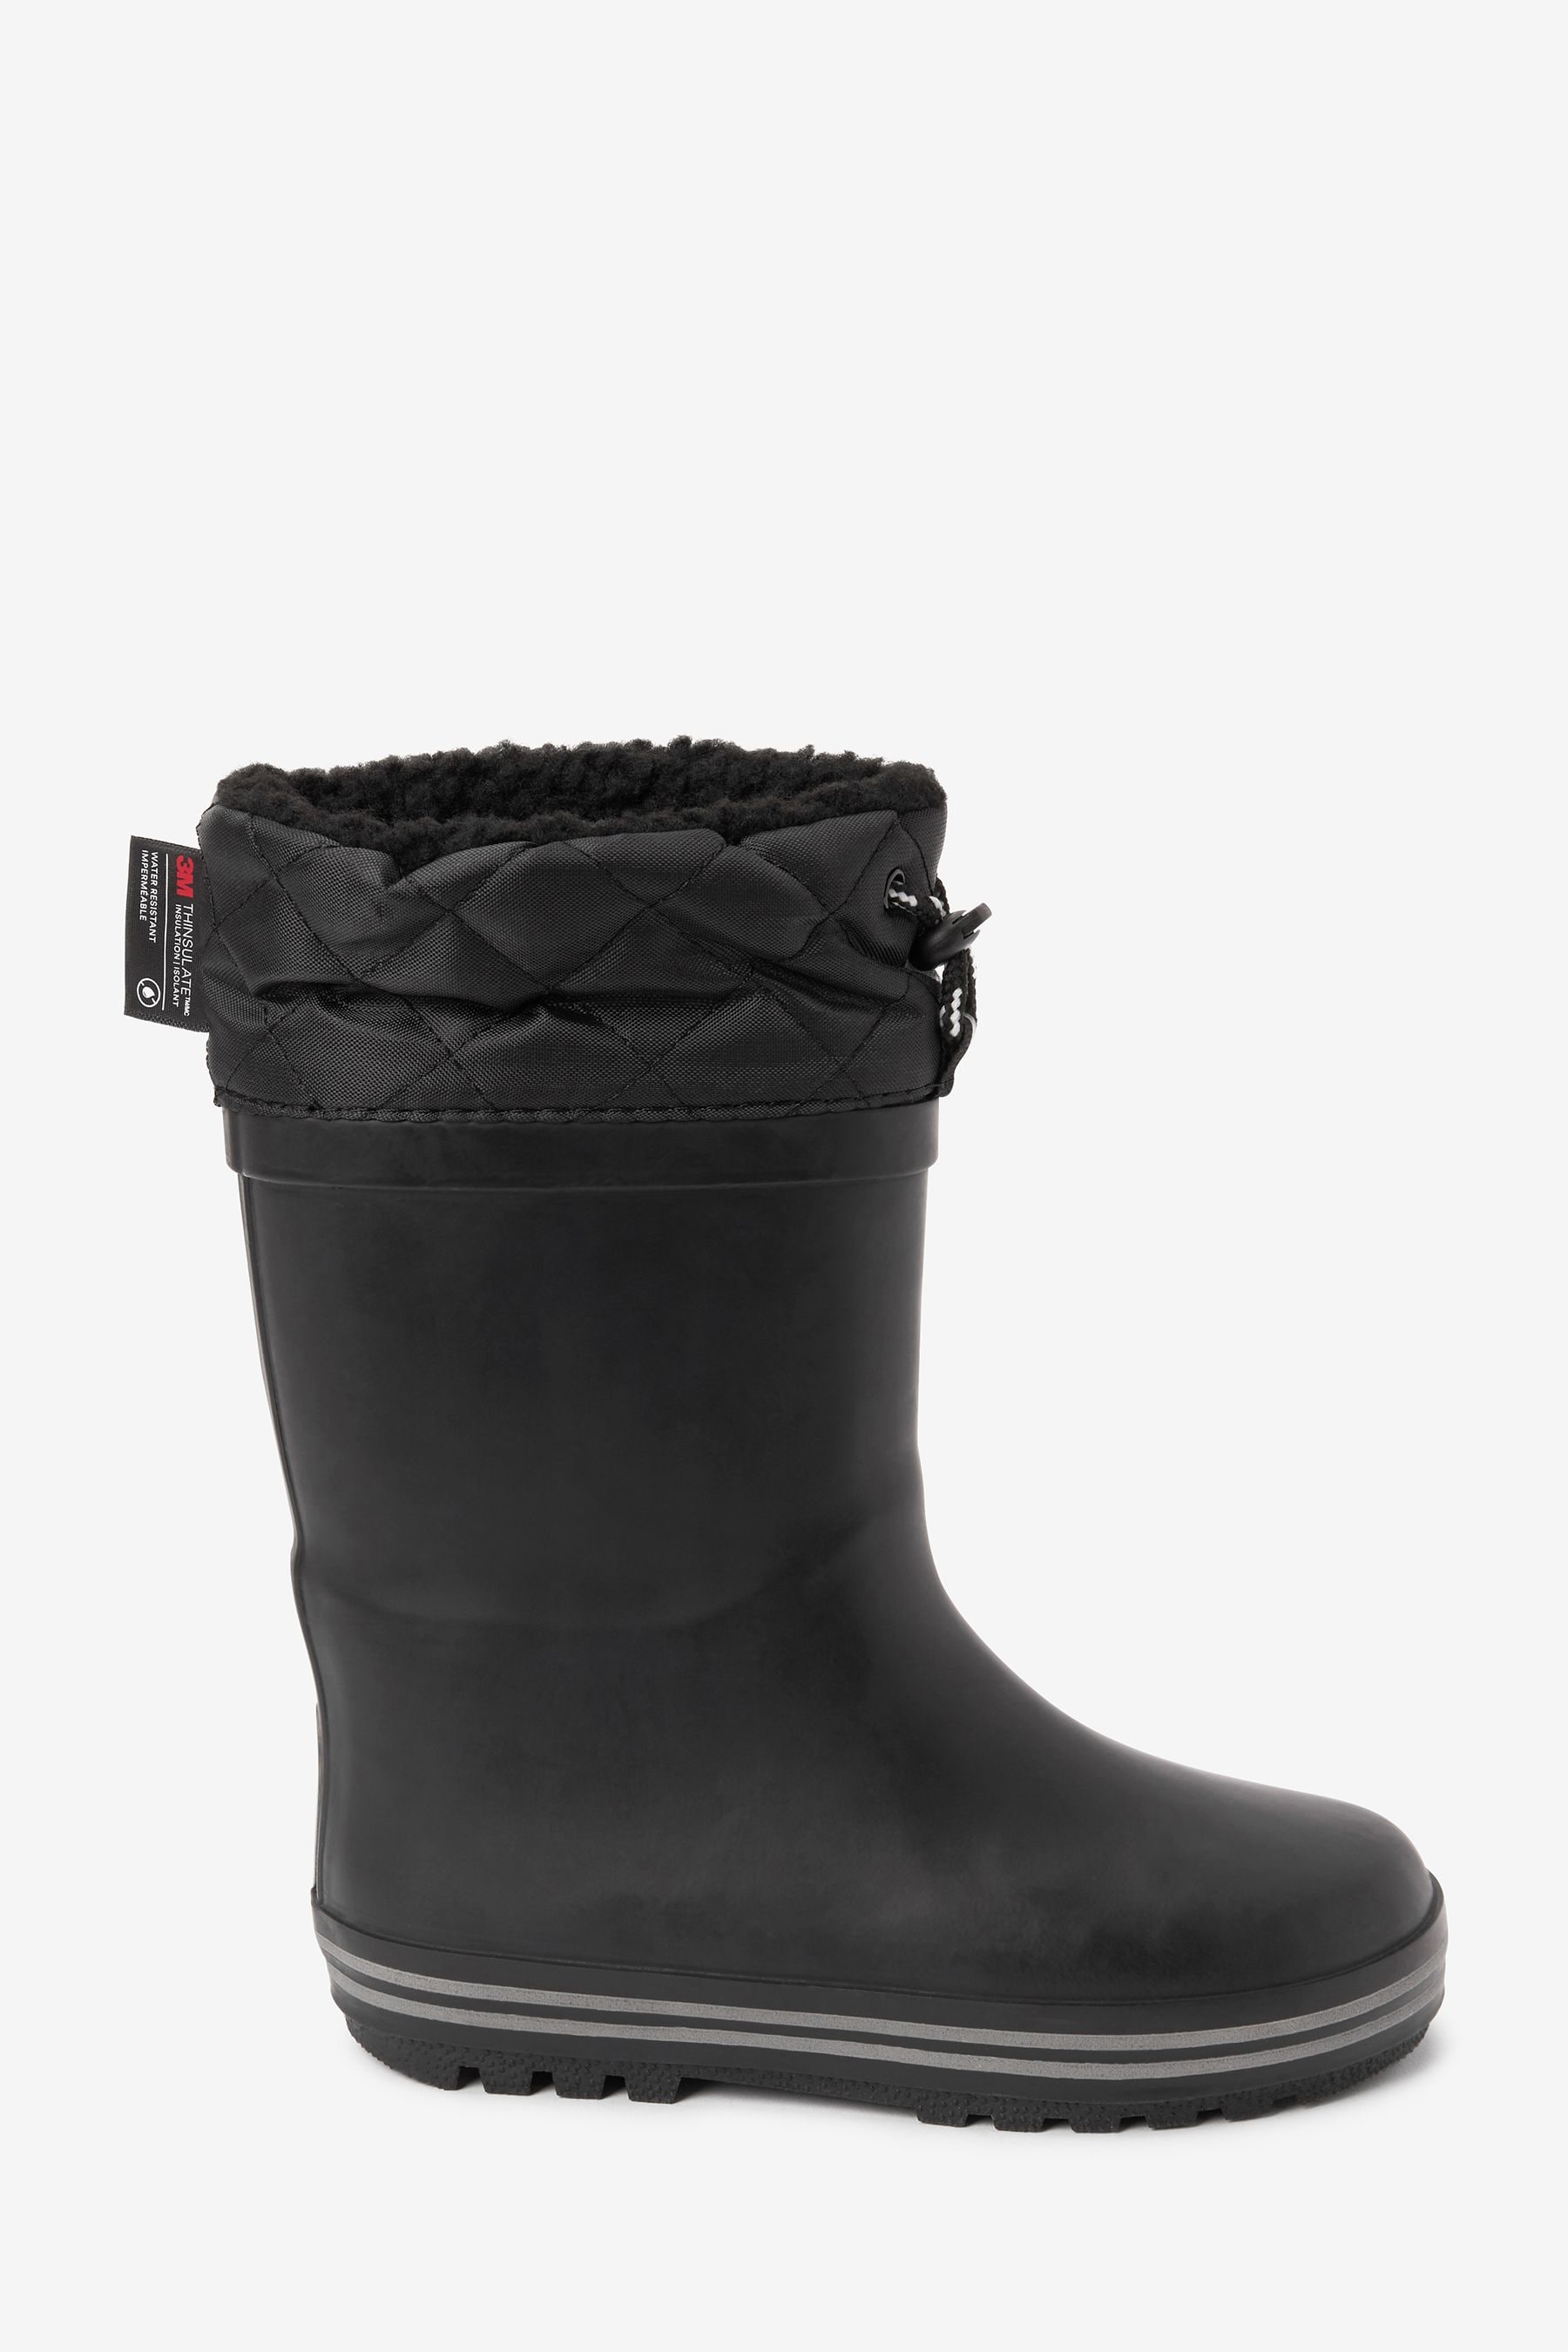 Buy Thinsulate™ Warm Lined Cuff Wellies from Next Australia